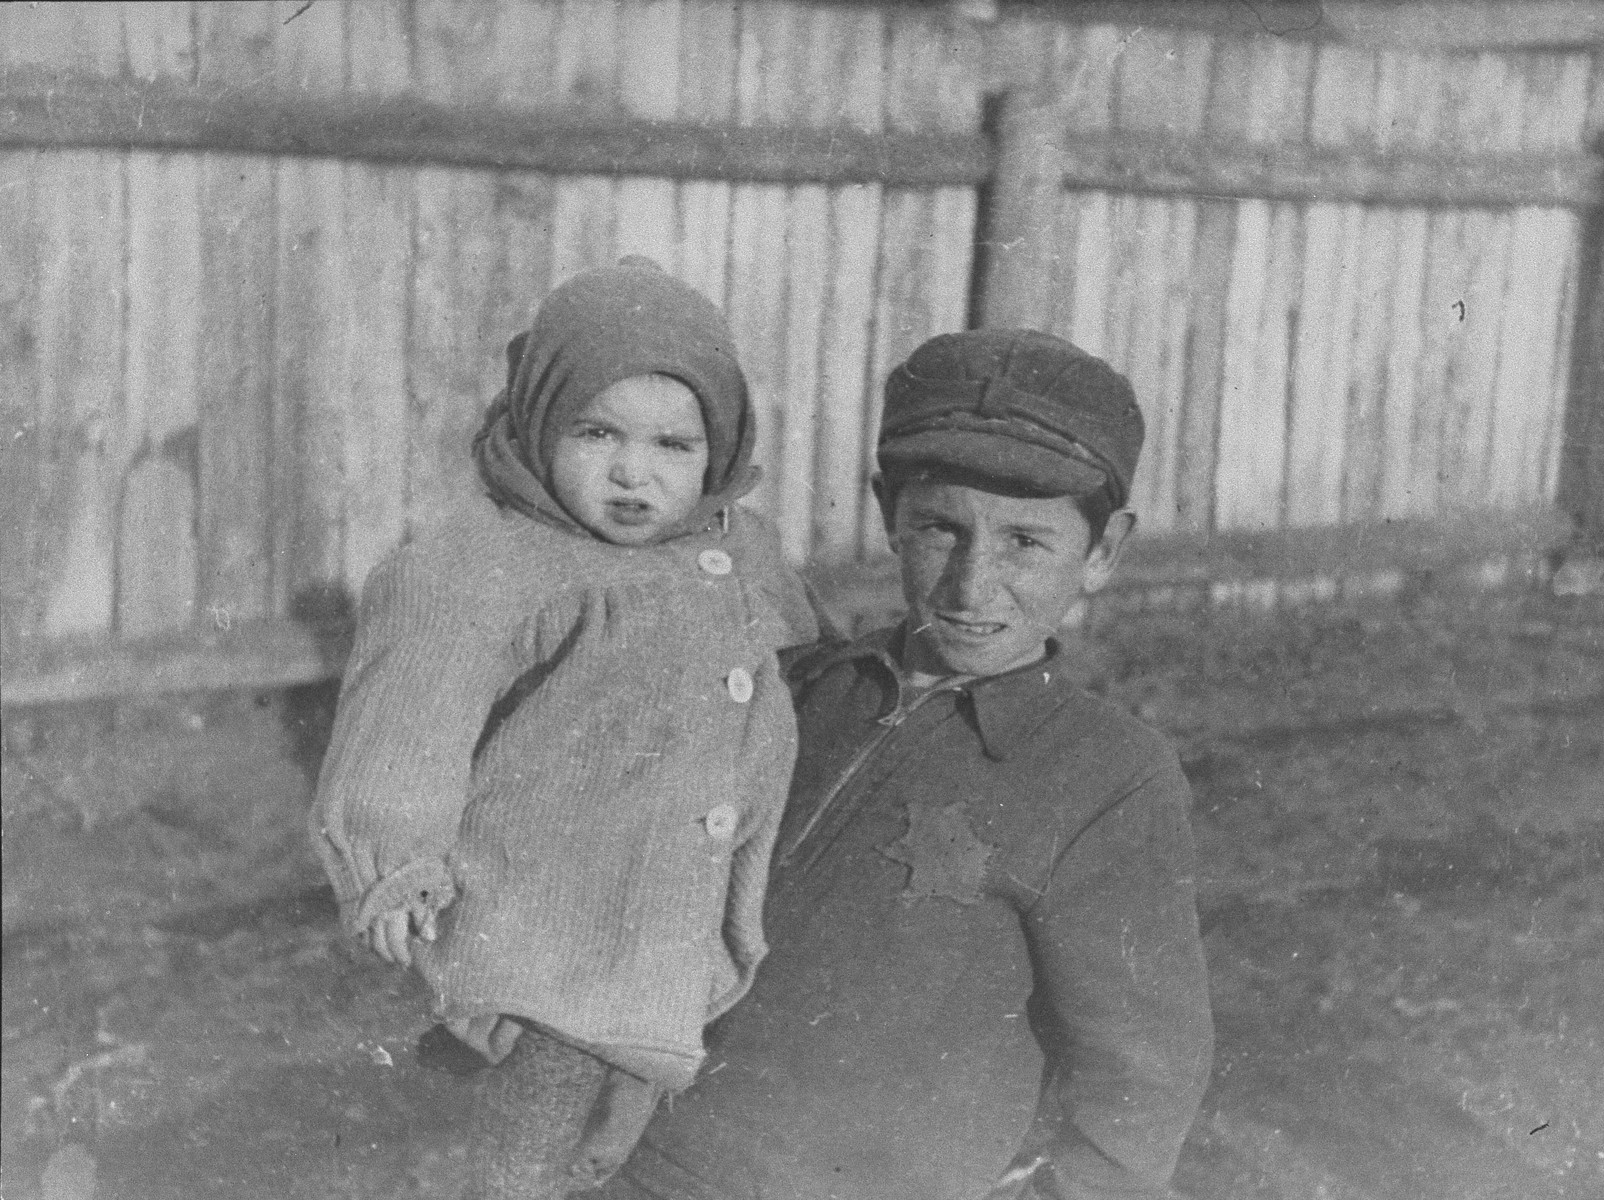 A young boy holding his younger brother in the Kovno ghetto.  

Older children frequently cared for younger siblings in the ghetto. 

The caption written on the back of the photograph by George Kadish (translated from Yiddish) reads, "Two orphan brothers in the Kovno ghetto."